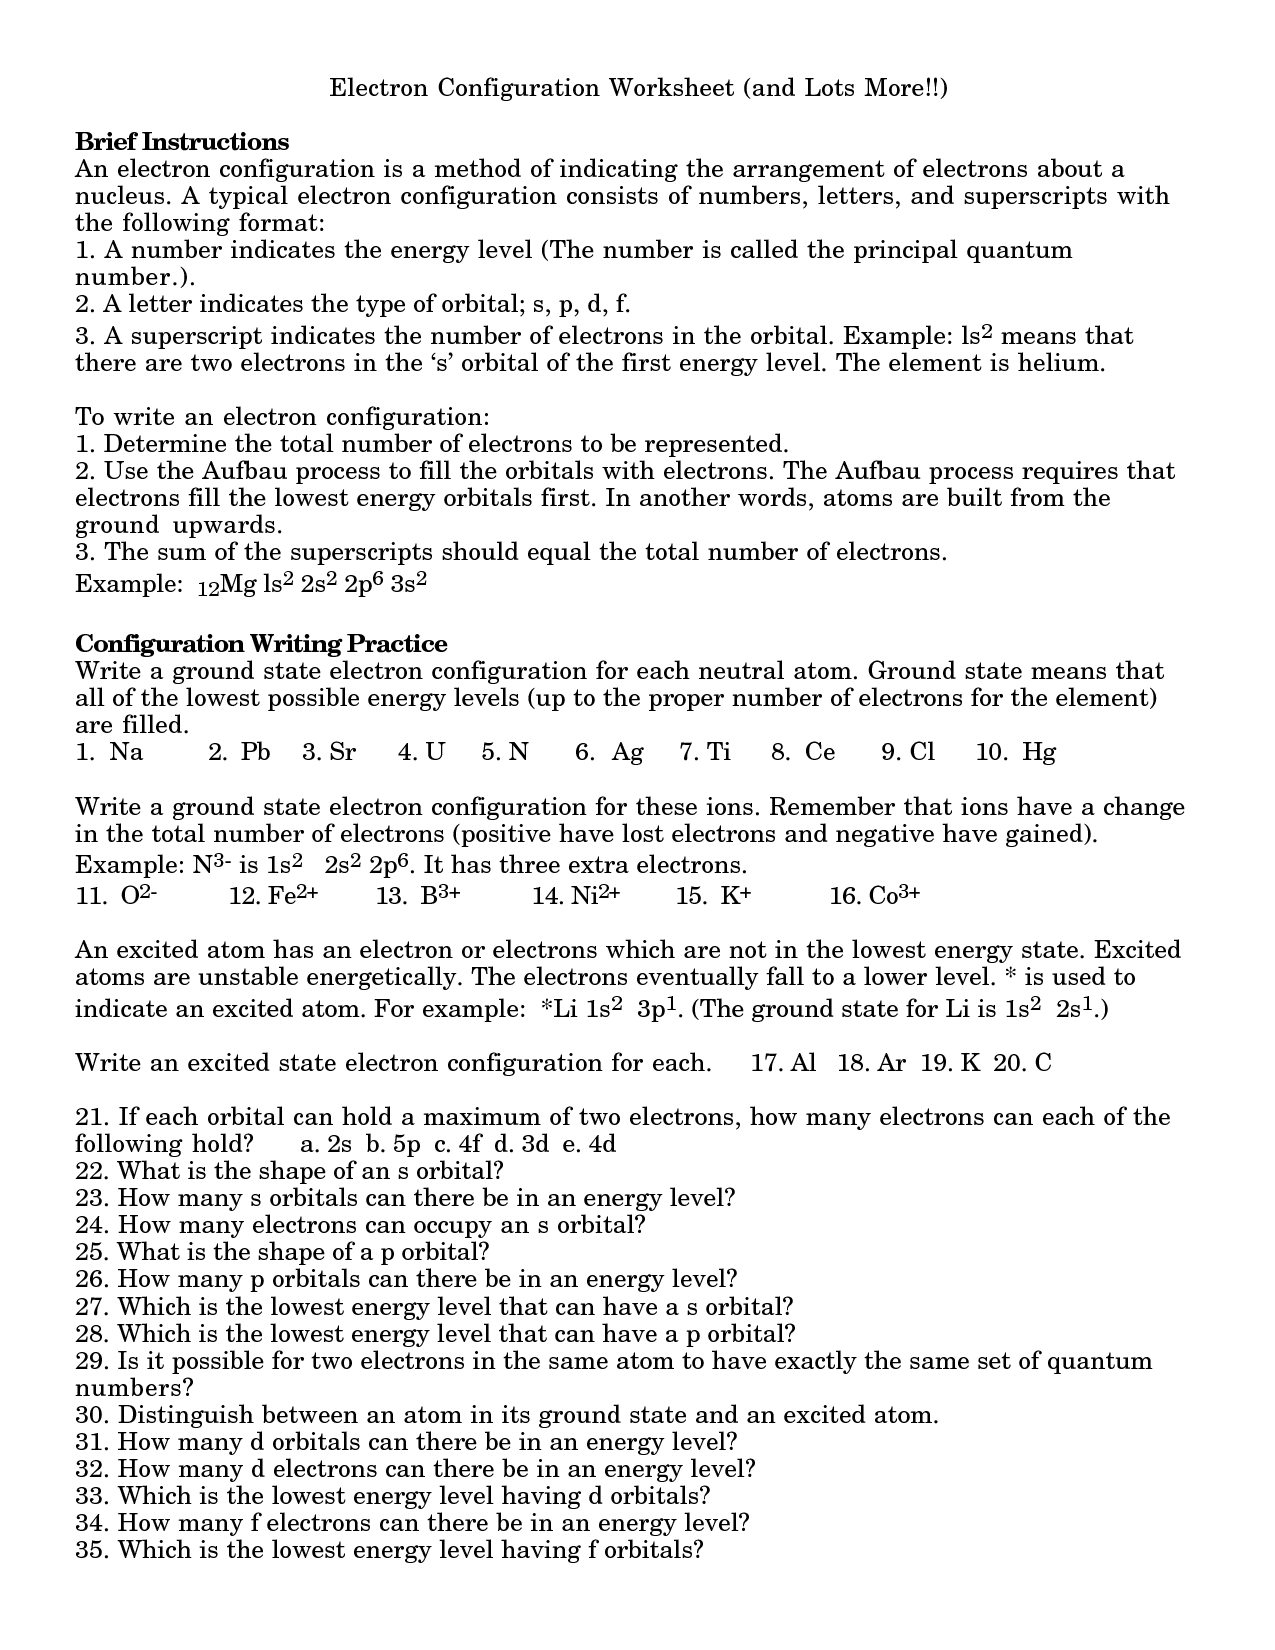 19 Best Images of Chemfiesta Worksheet Answers - Electron Configuration